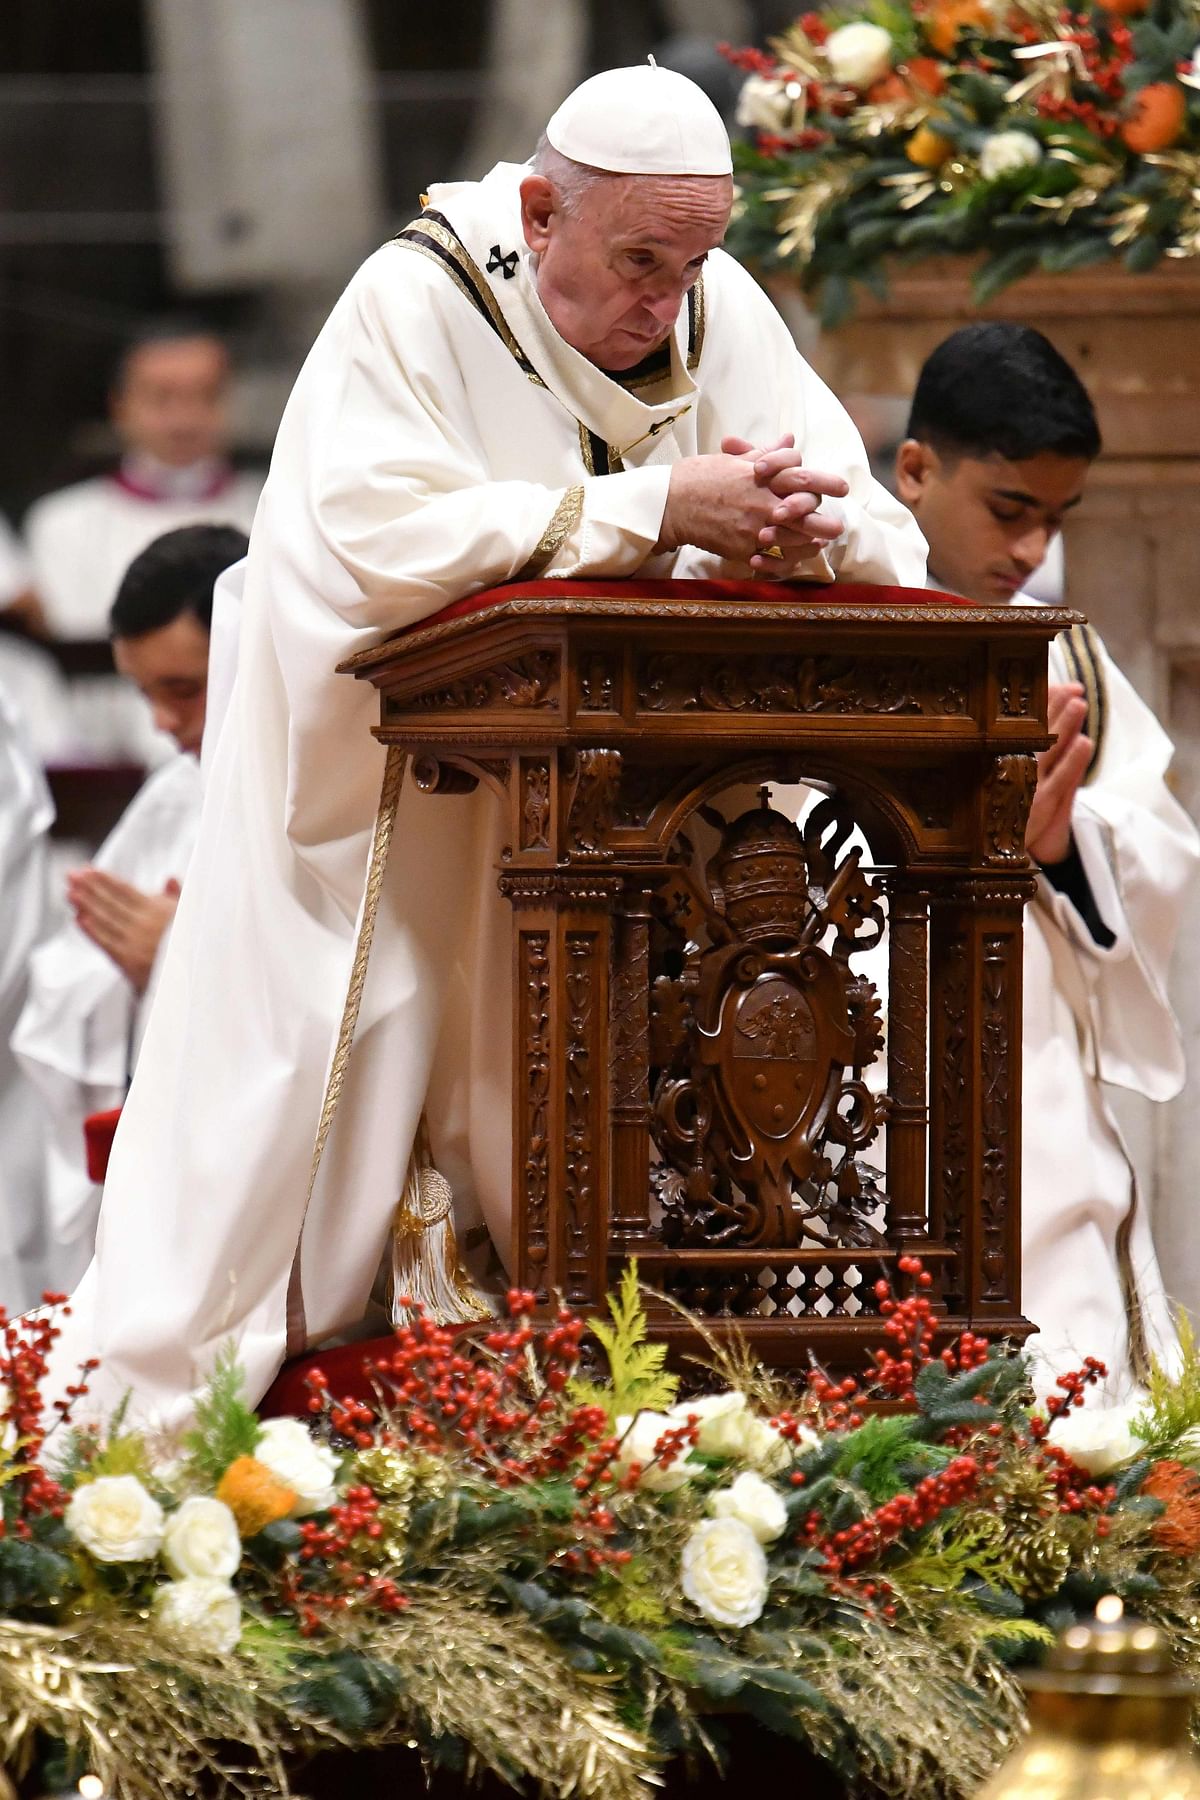 Pope Francis leads a Christmas Eve mass in St Peter`s Basilica to mark the nativity of Jesus Christ on 24 December 2019, at the Vatican. Photo: AFP